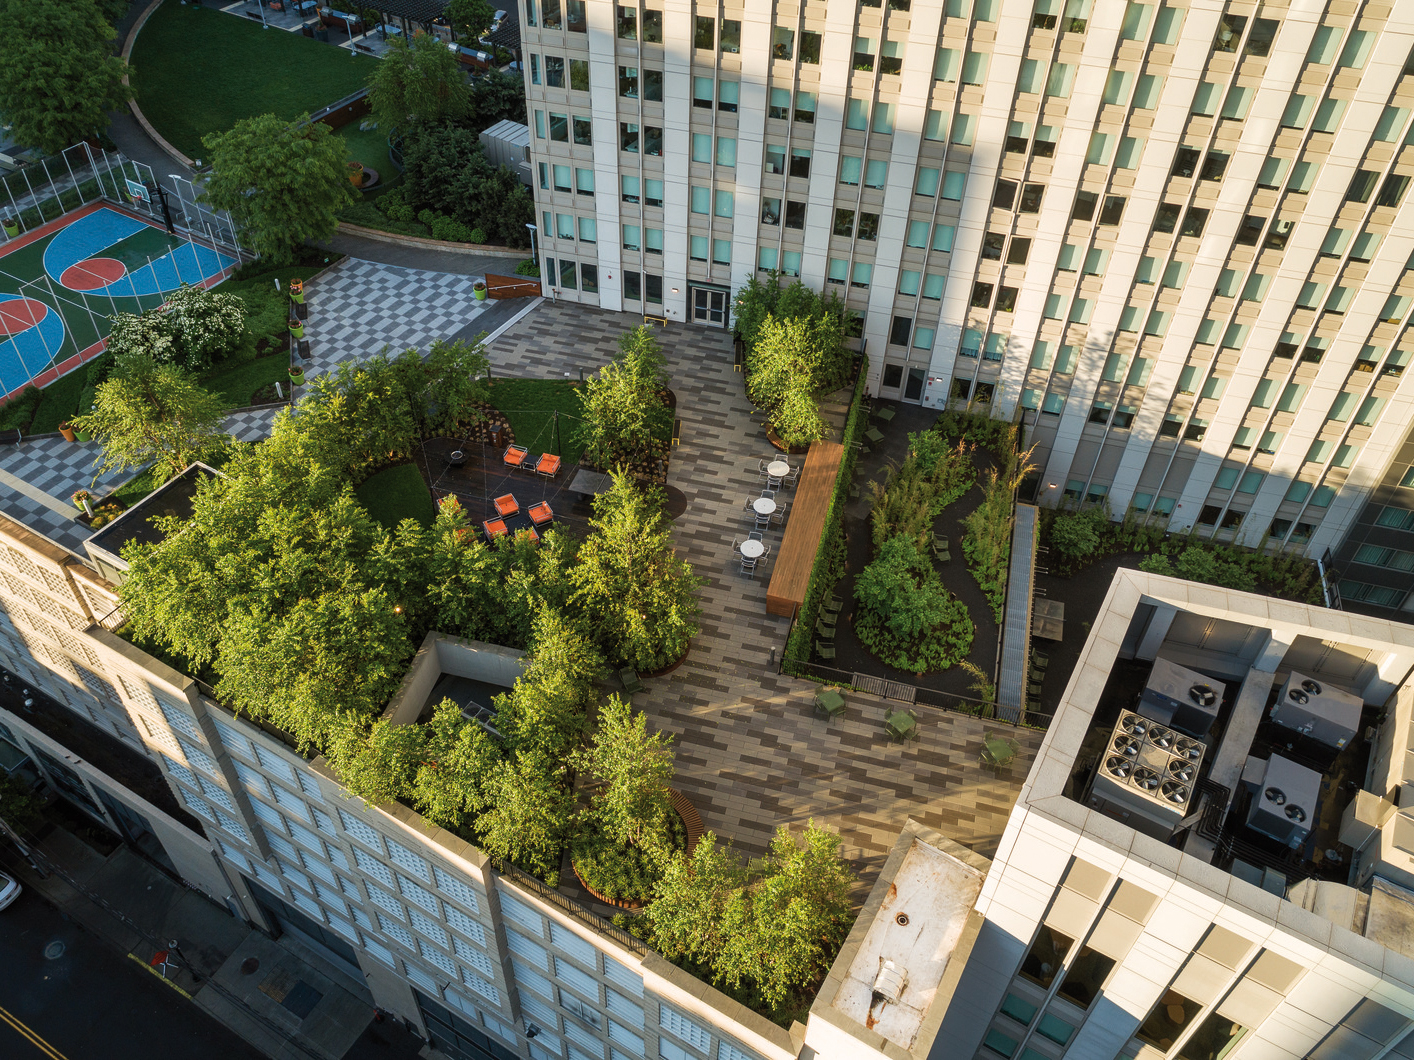 A modern rooftop garden nestled amidst towering urban buildings. The harmonious blend of architecture and green spaces creates an innovative and sustainable oasis.